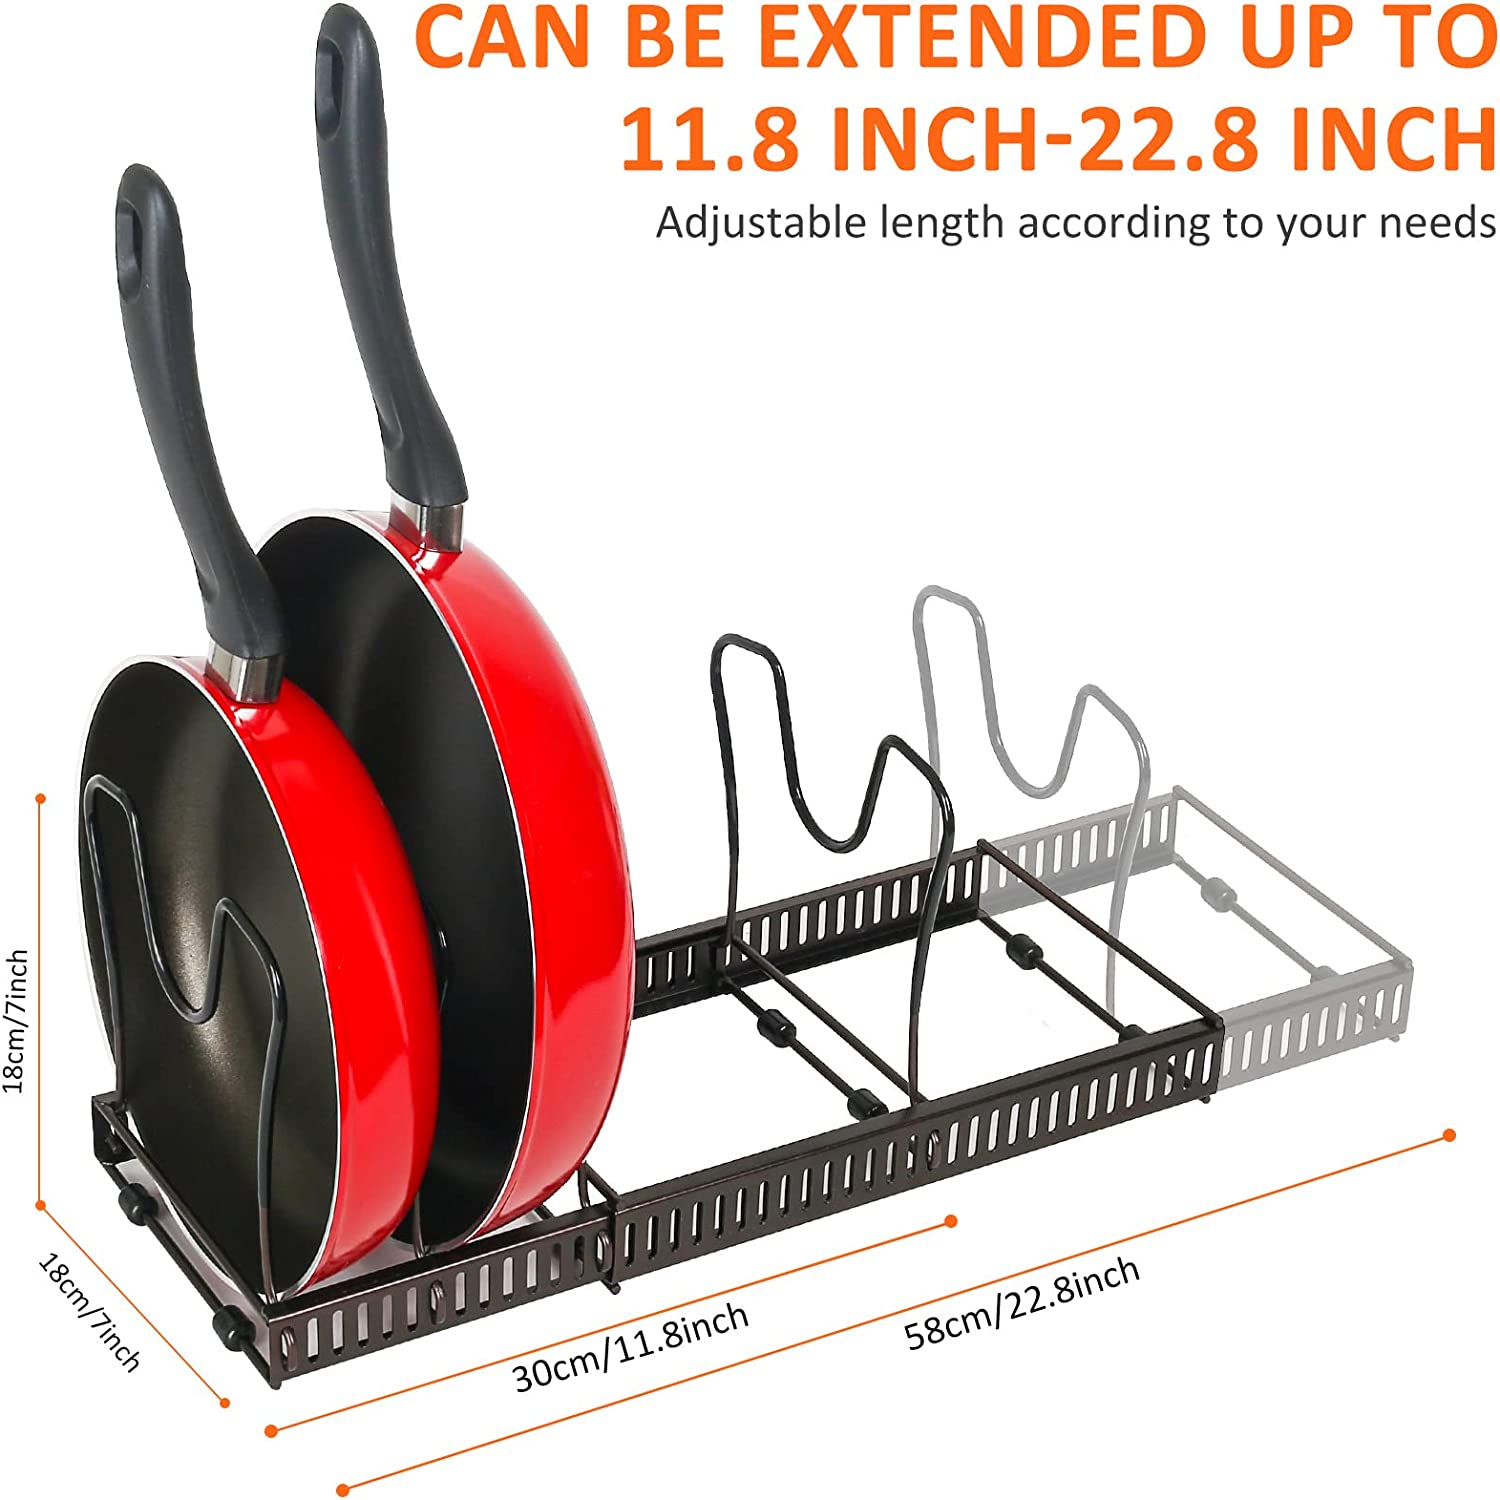 Expandable Pot Lid Organizer Holder for Cabinet, Kitchen, Cookware, with 10 Adjustable Compartment